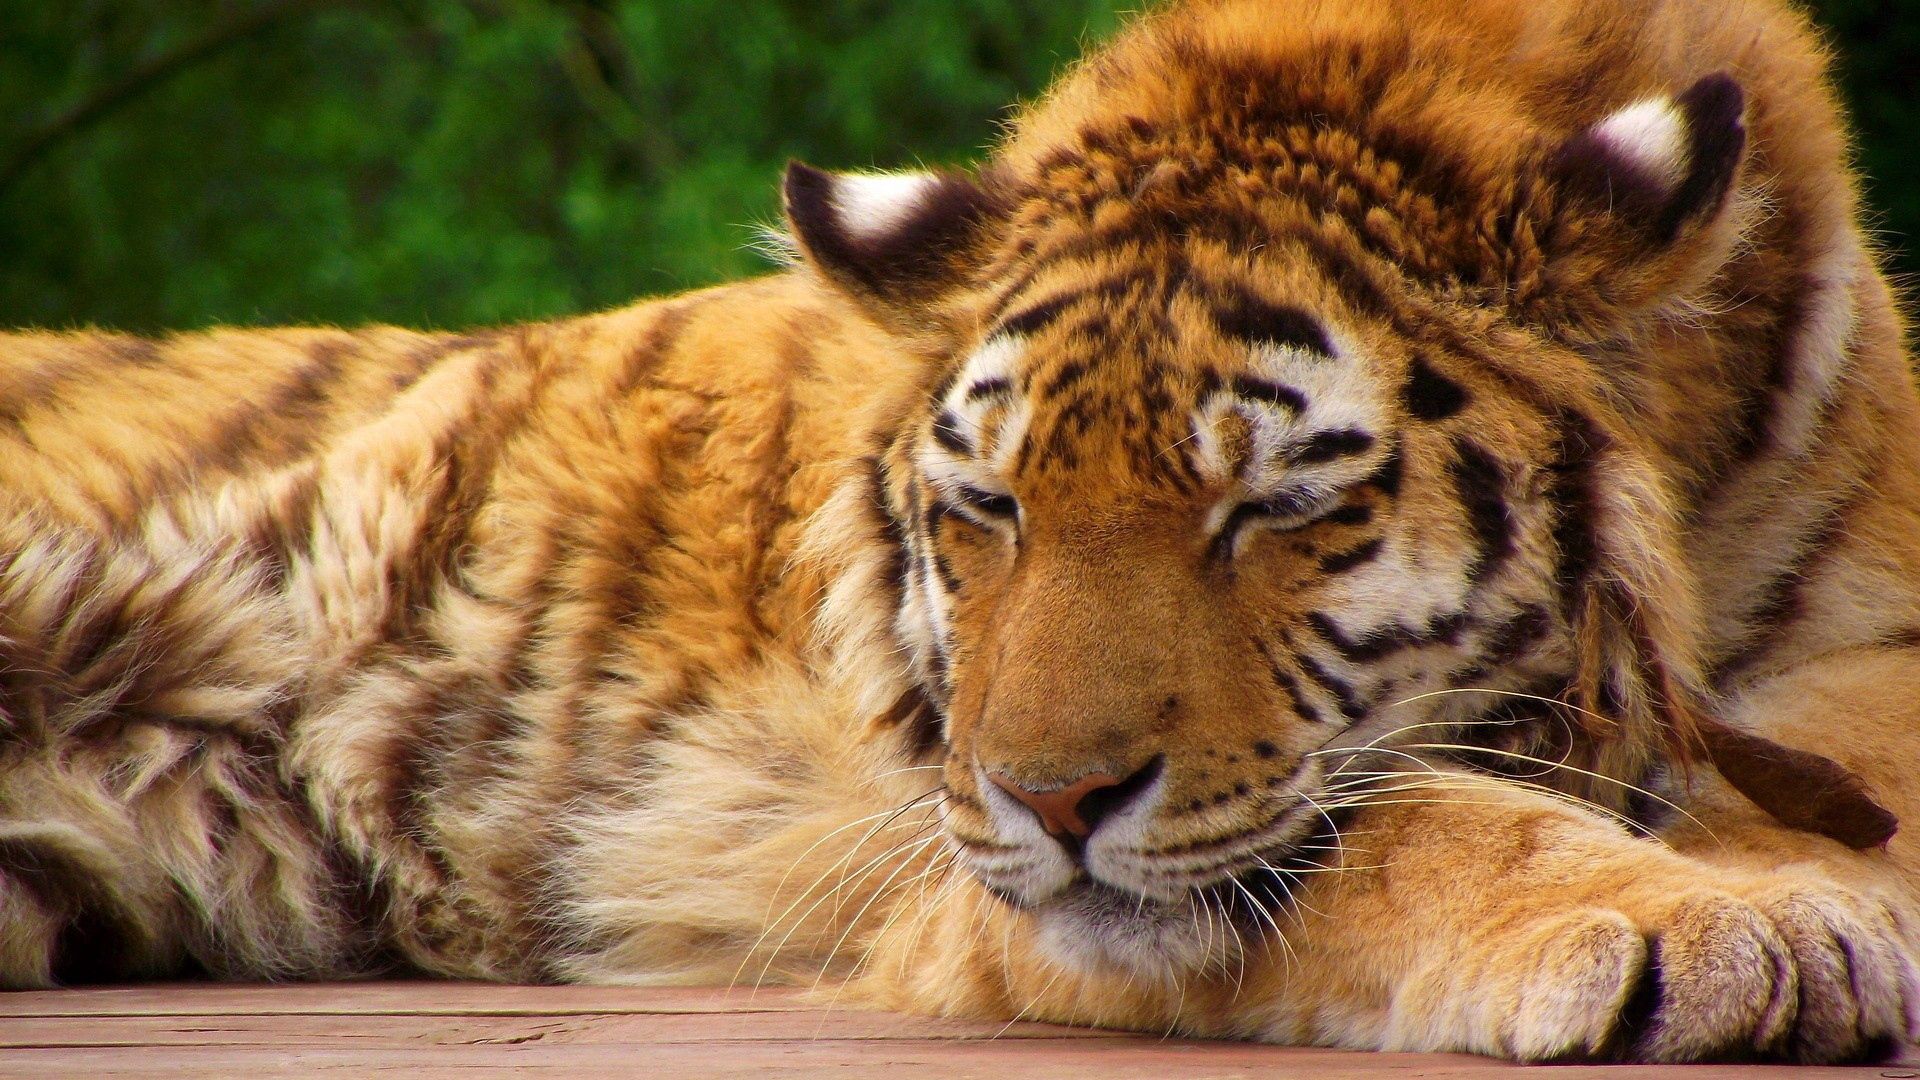 big cat, animals, muzzle, striped, relaxation, rest, tiger cell phone wallpapers